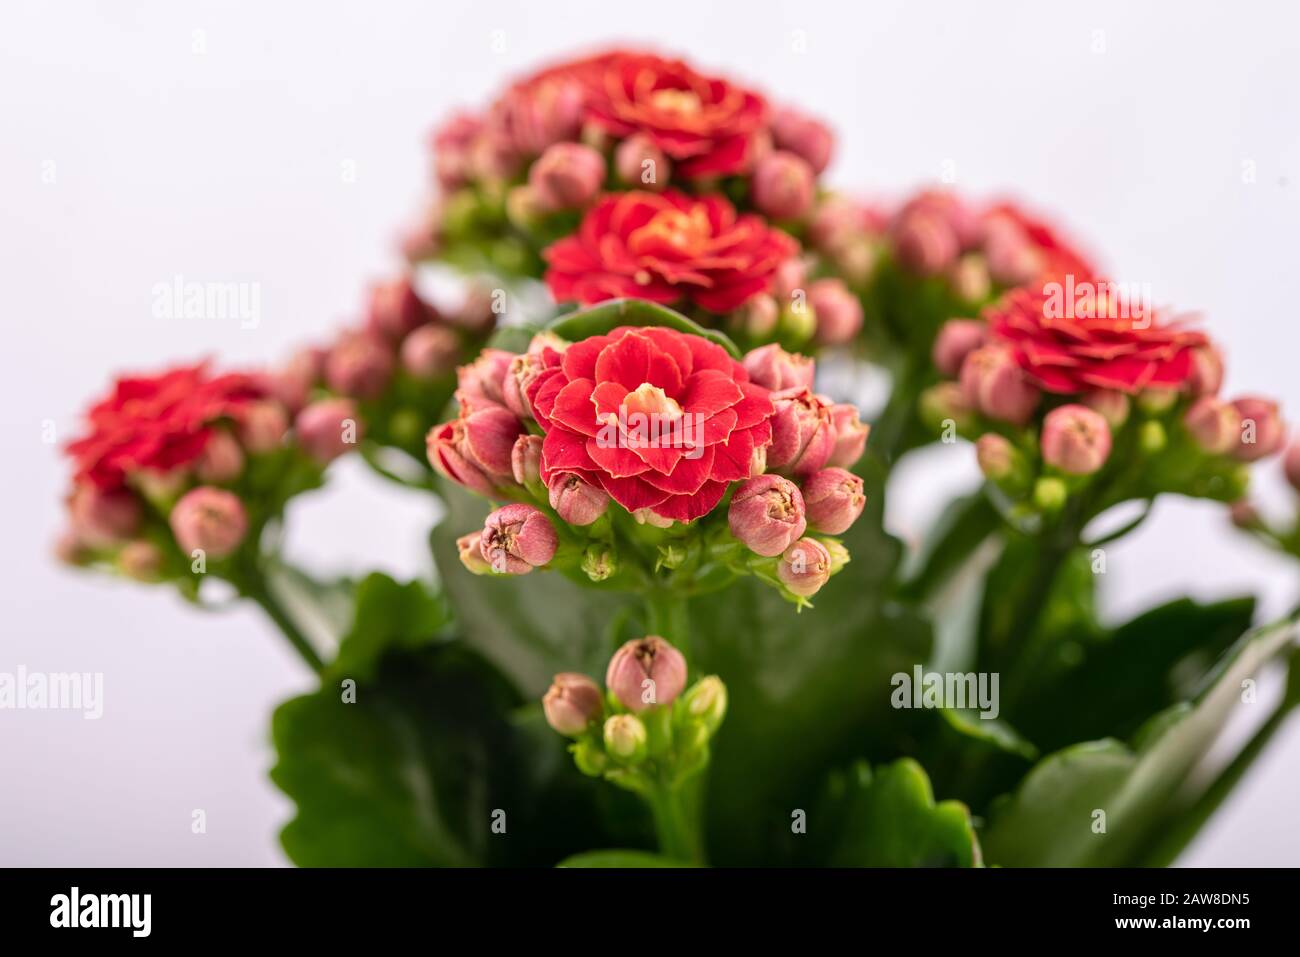 Calandiva with red flowers on a white background close up Stock Photo